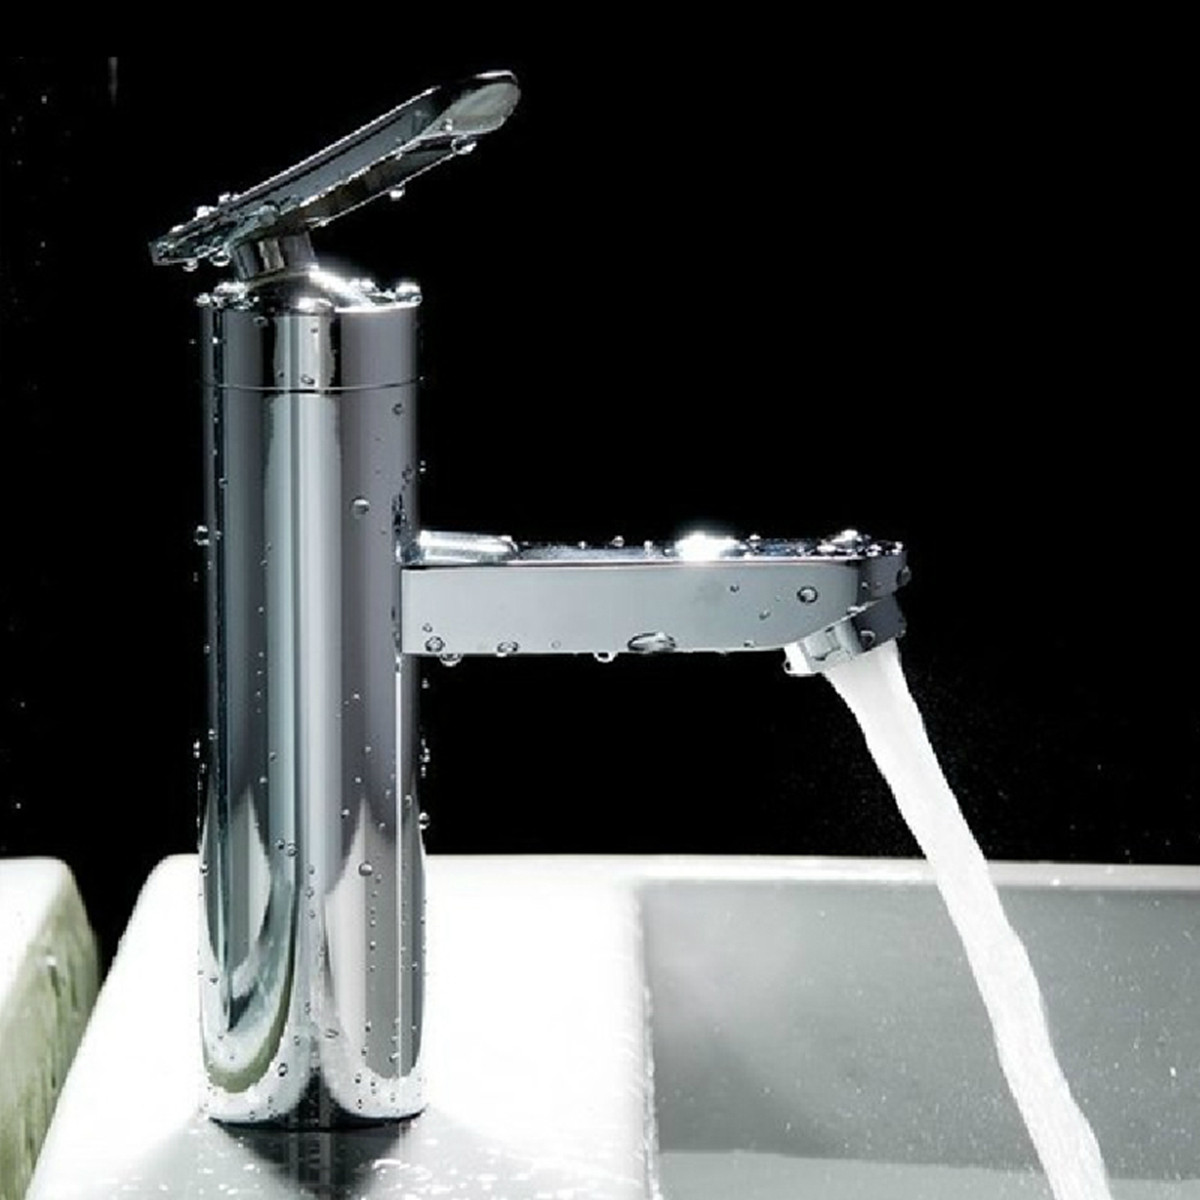 Bathroom-Kitchen-Wash-Basin-Faucet-Two-Hole-HotampCold-Mixer-Water-Taps-1178900